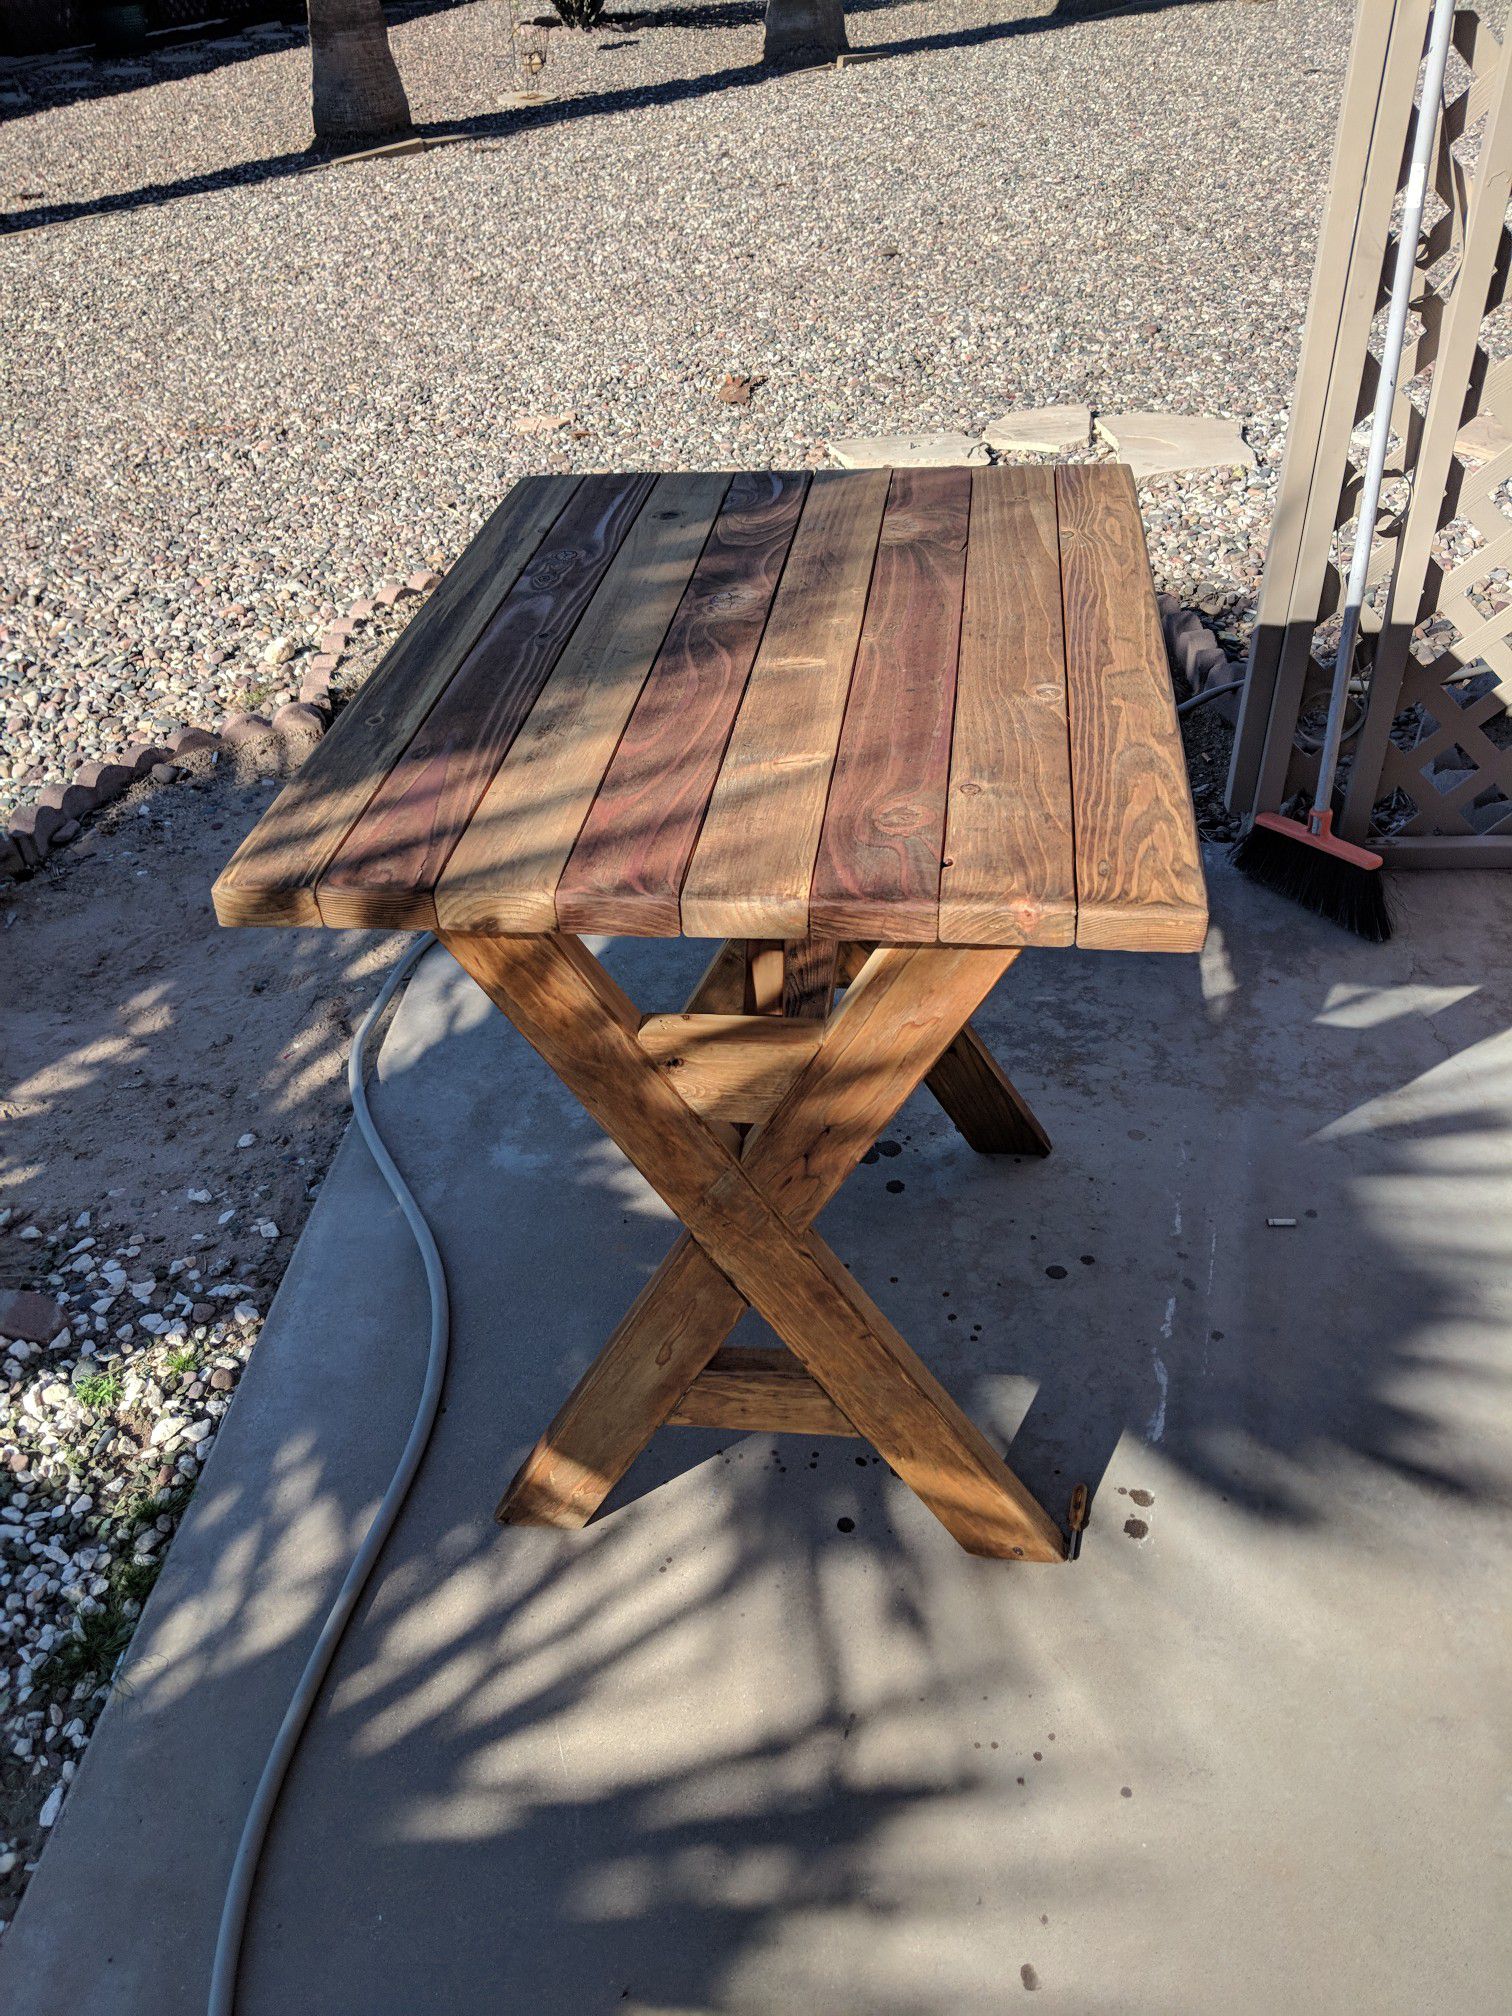 Small kitchen table 2 foot by 3 foot 3 foot tall, Solid Wood Handmade